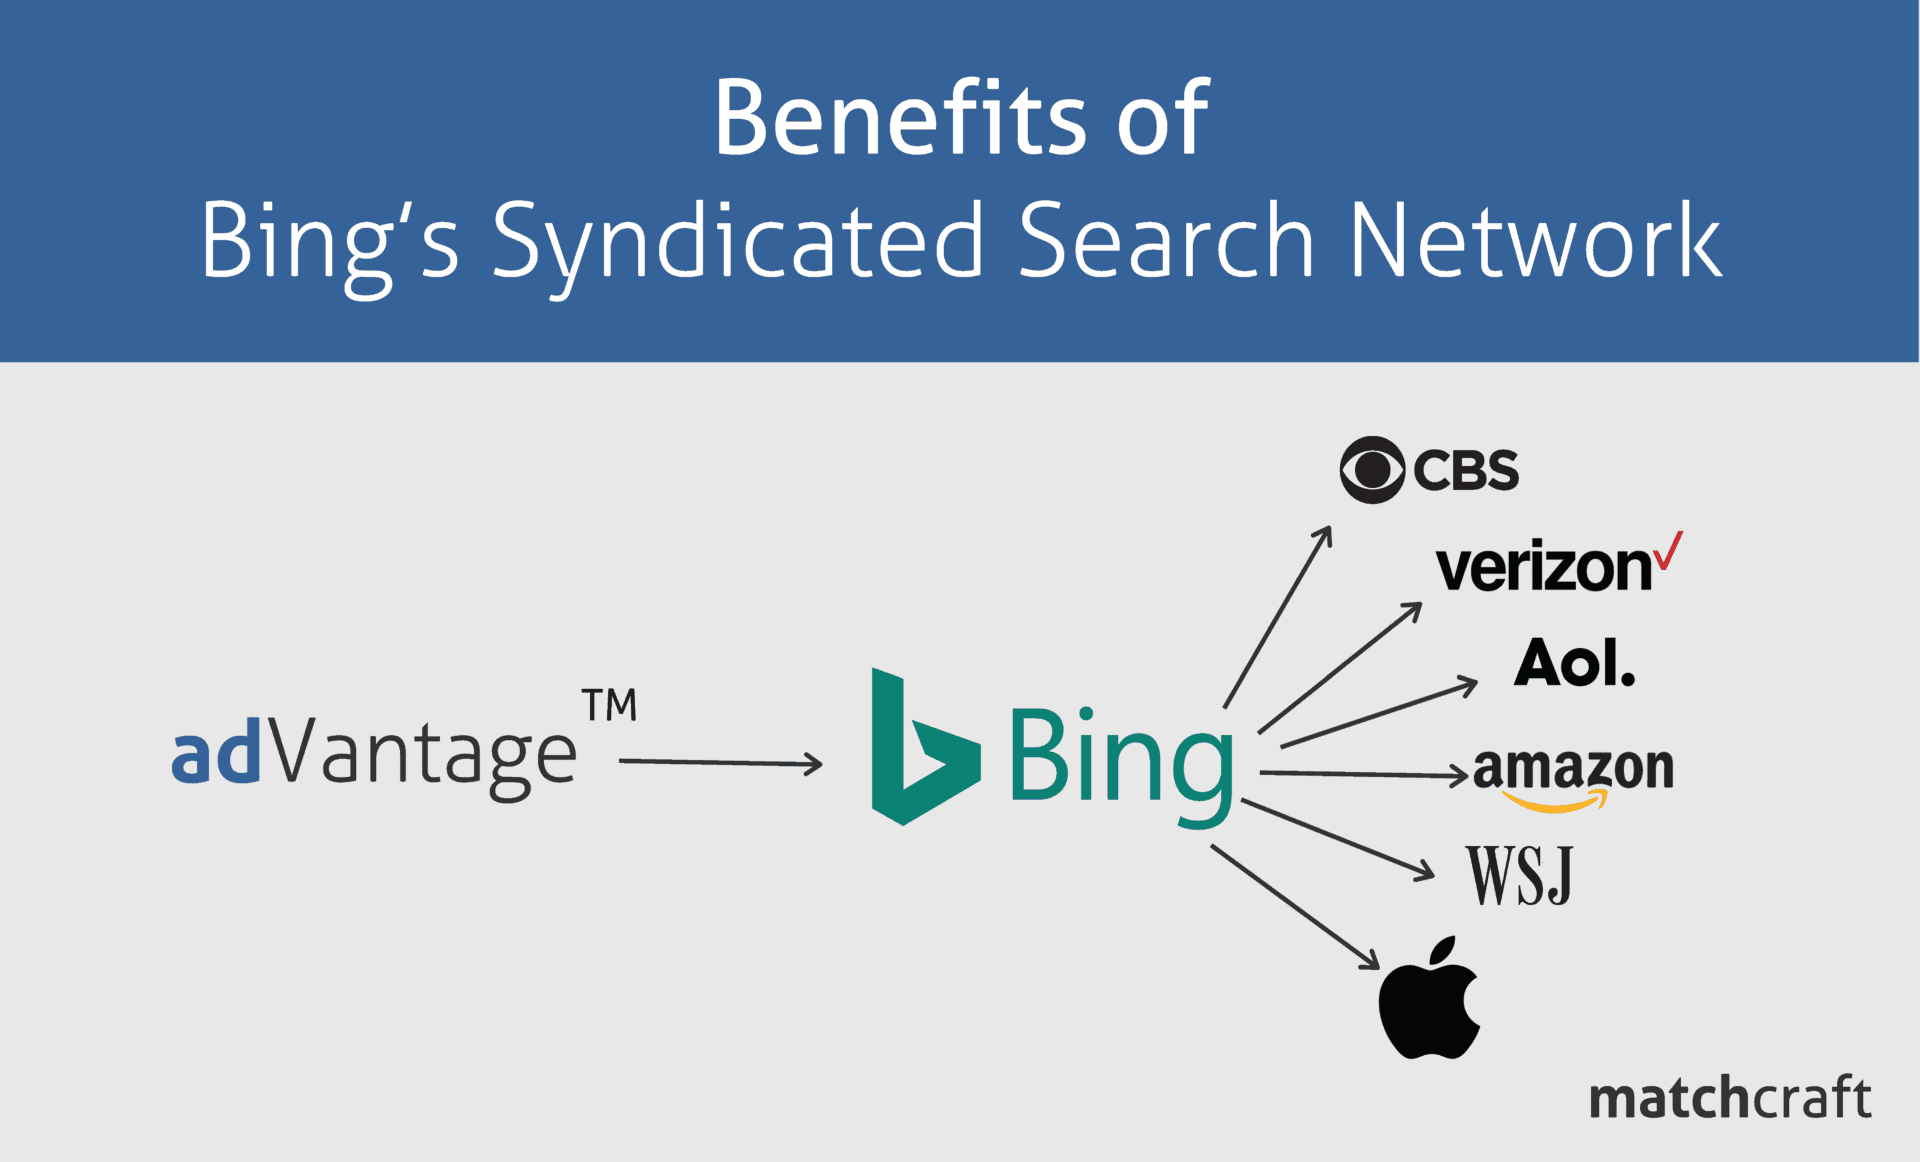 Benefits of Bing’s Syndicated Search Network